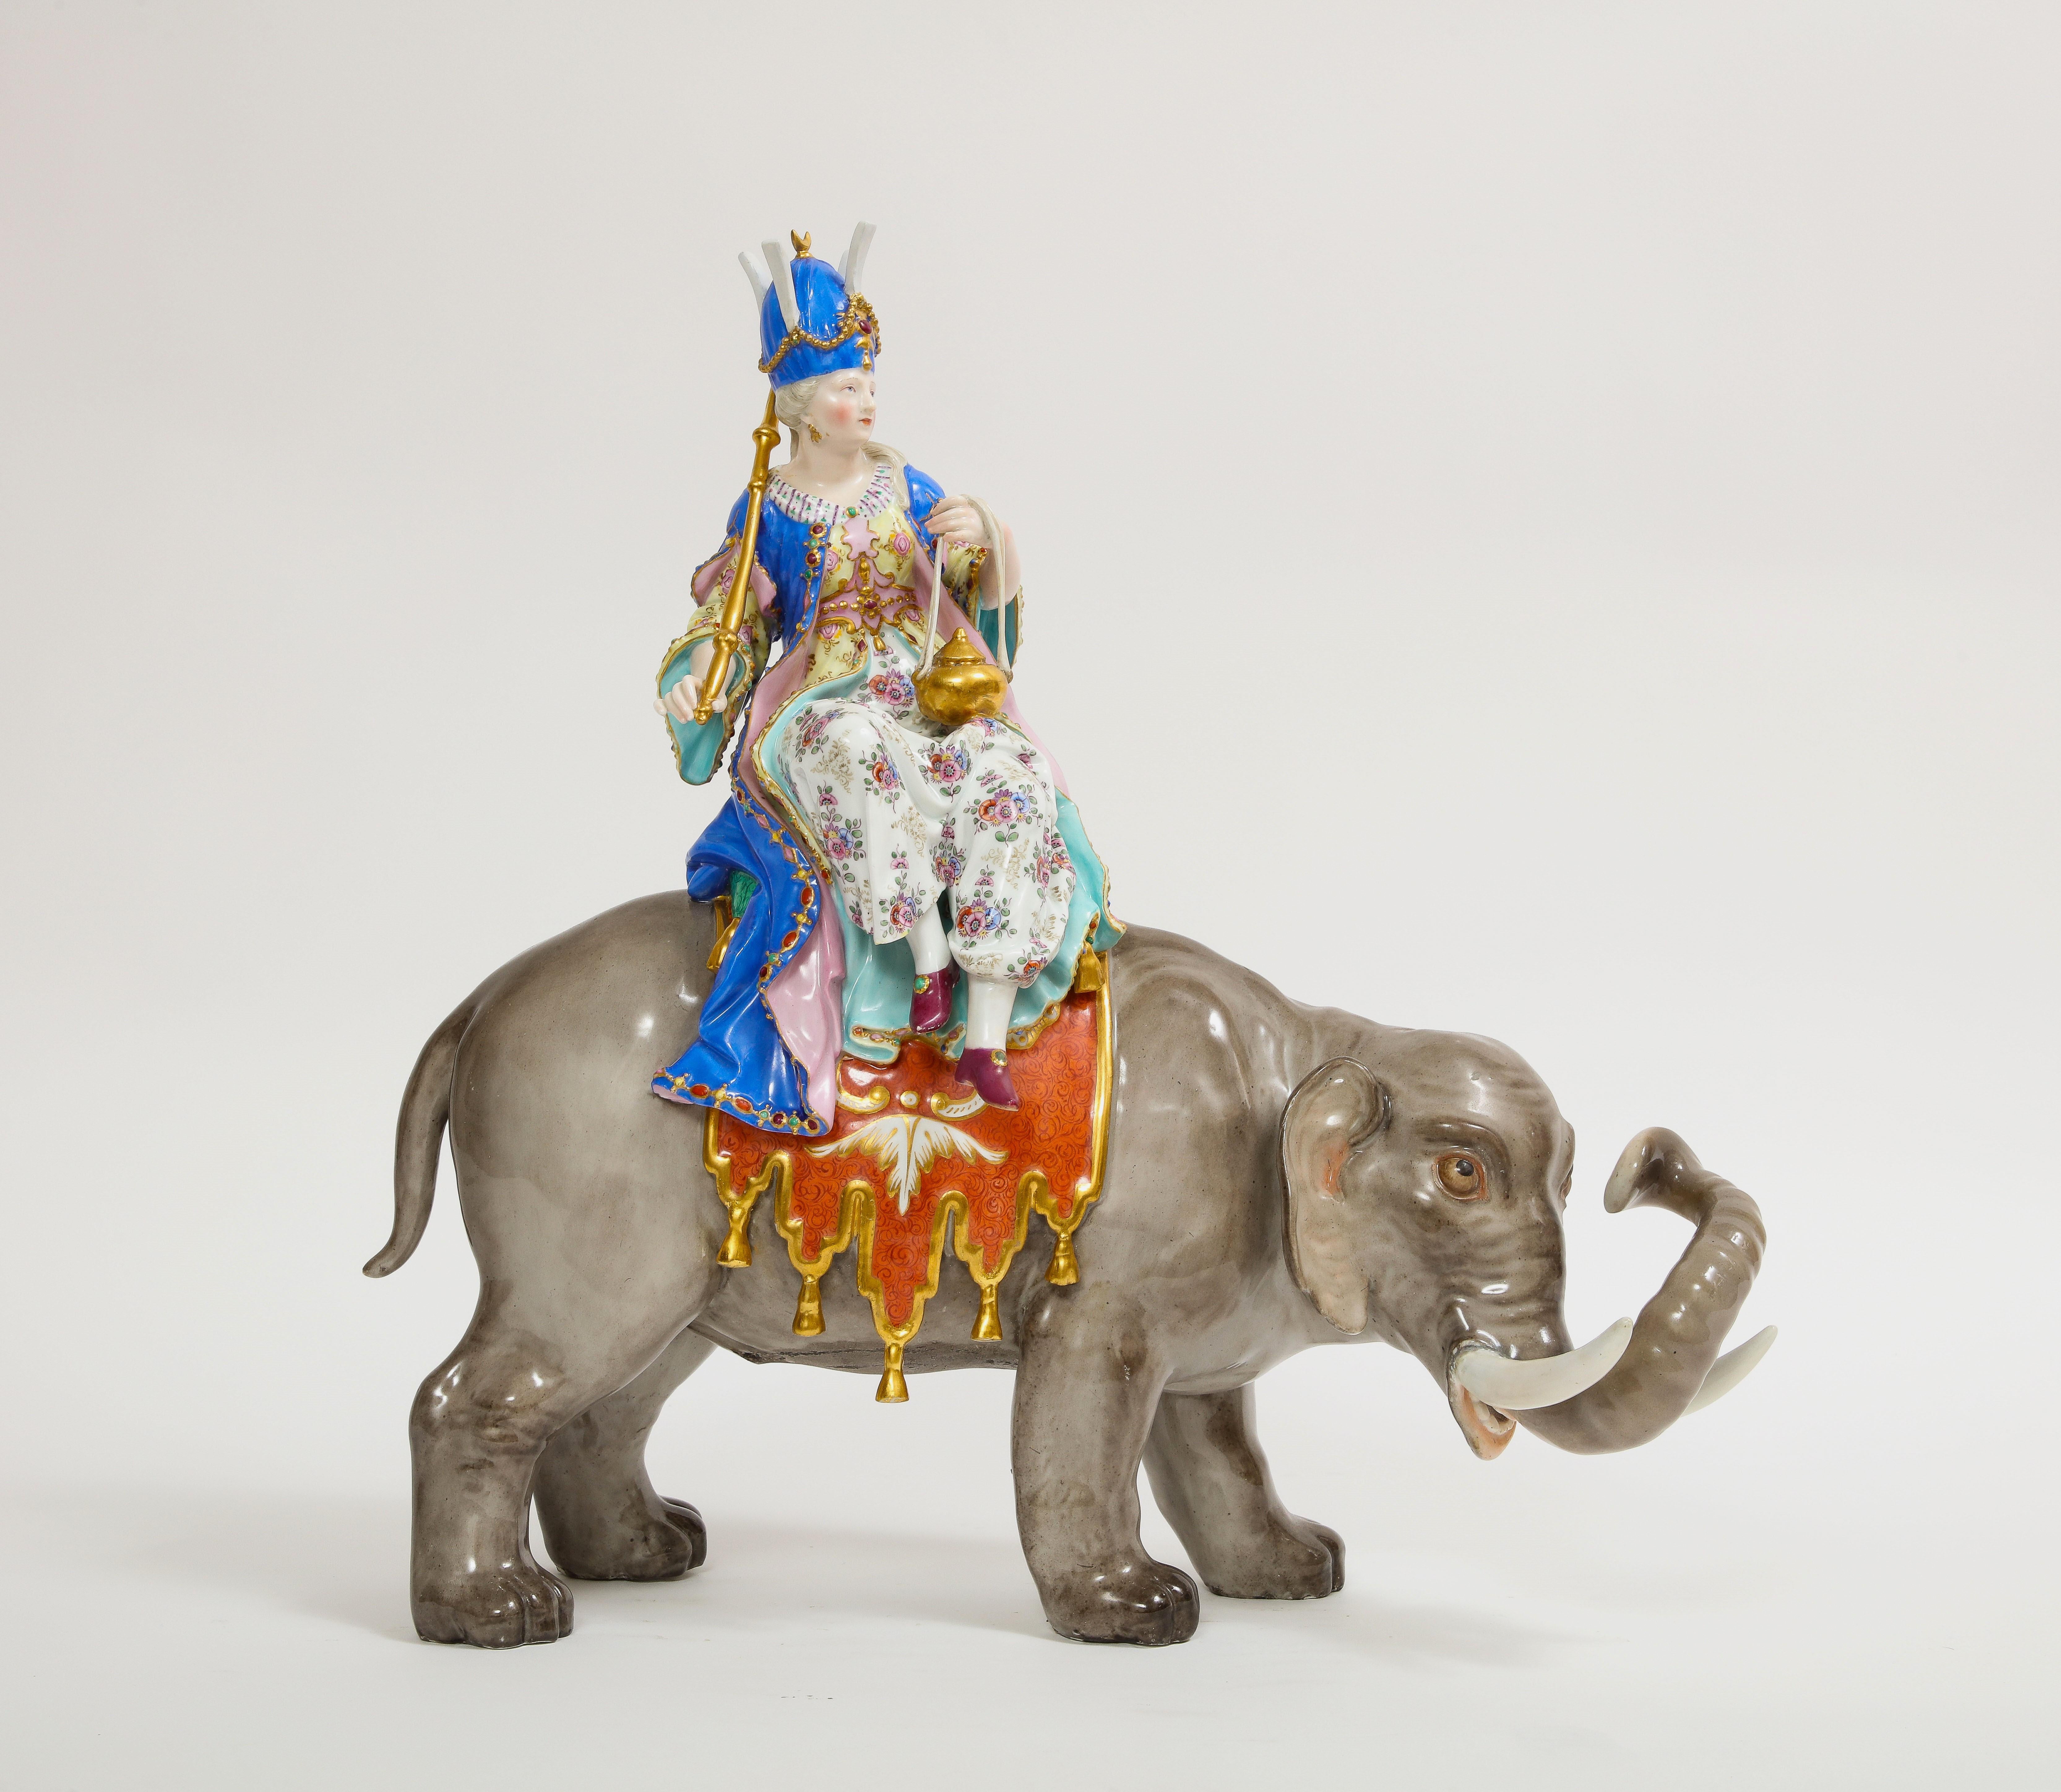 An Elaborate 19th century Meissen Porcelain Figure of a Sultana Riding an Elephant. After the model by P.J. Reinicke and J.J. Kändler, the Sultana sitting on the elephants back and holding an orb and scepter, wearing a jeweled turban. The Sultana